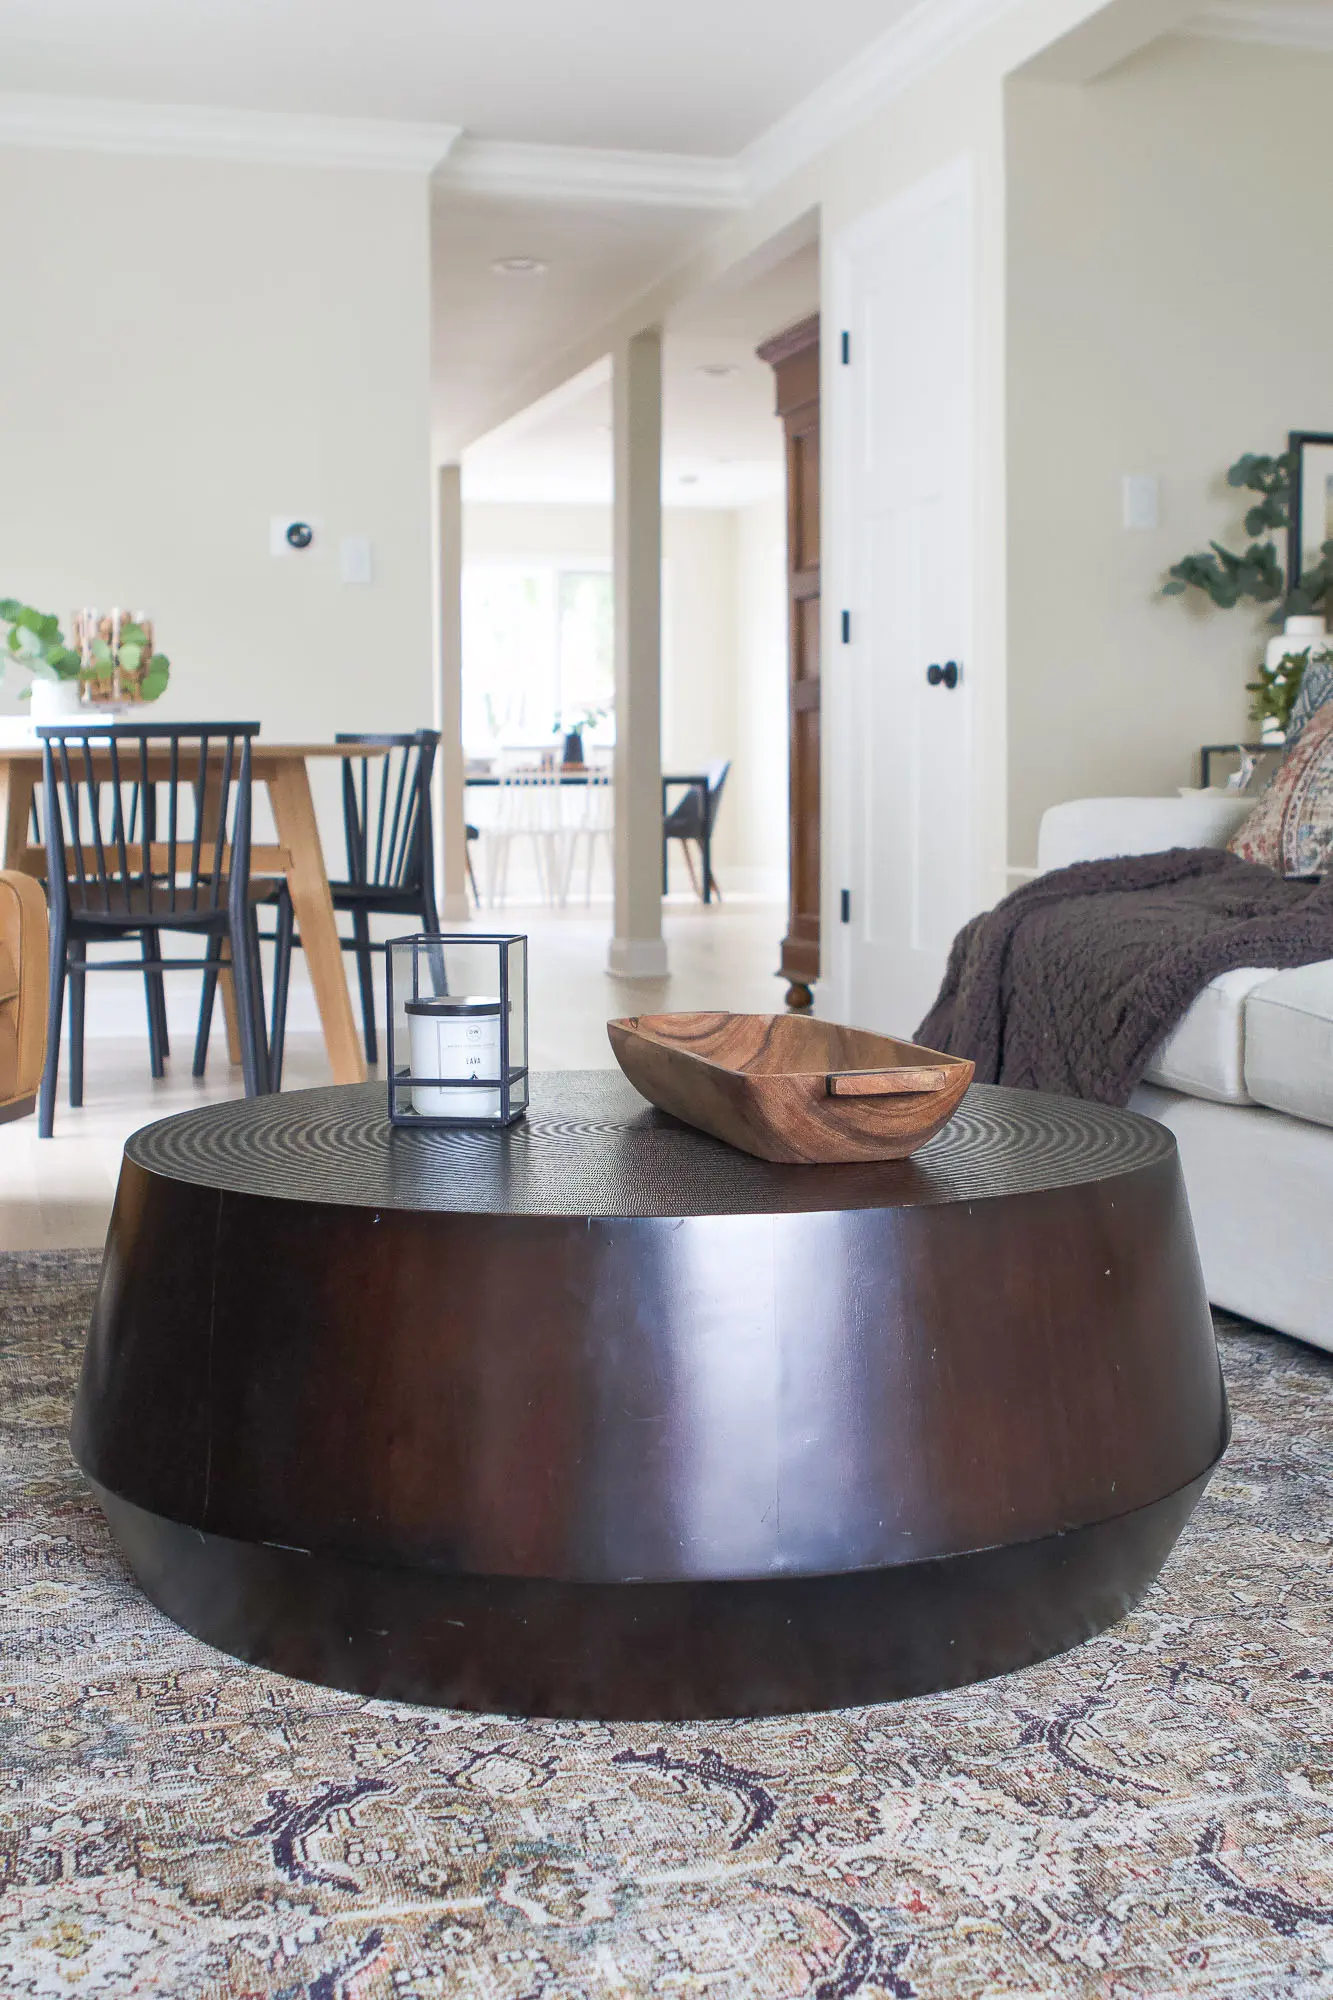 Our round coffee table from Crate and Barrel